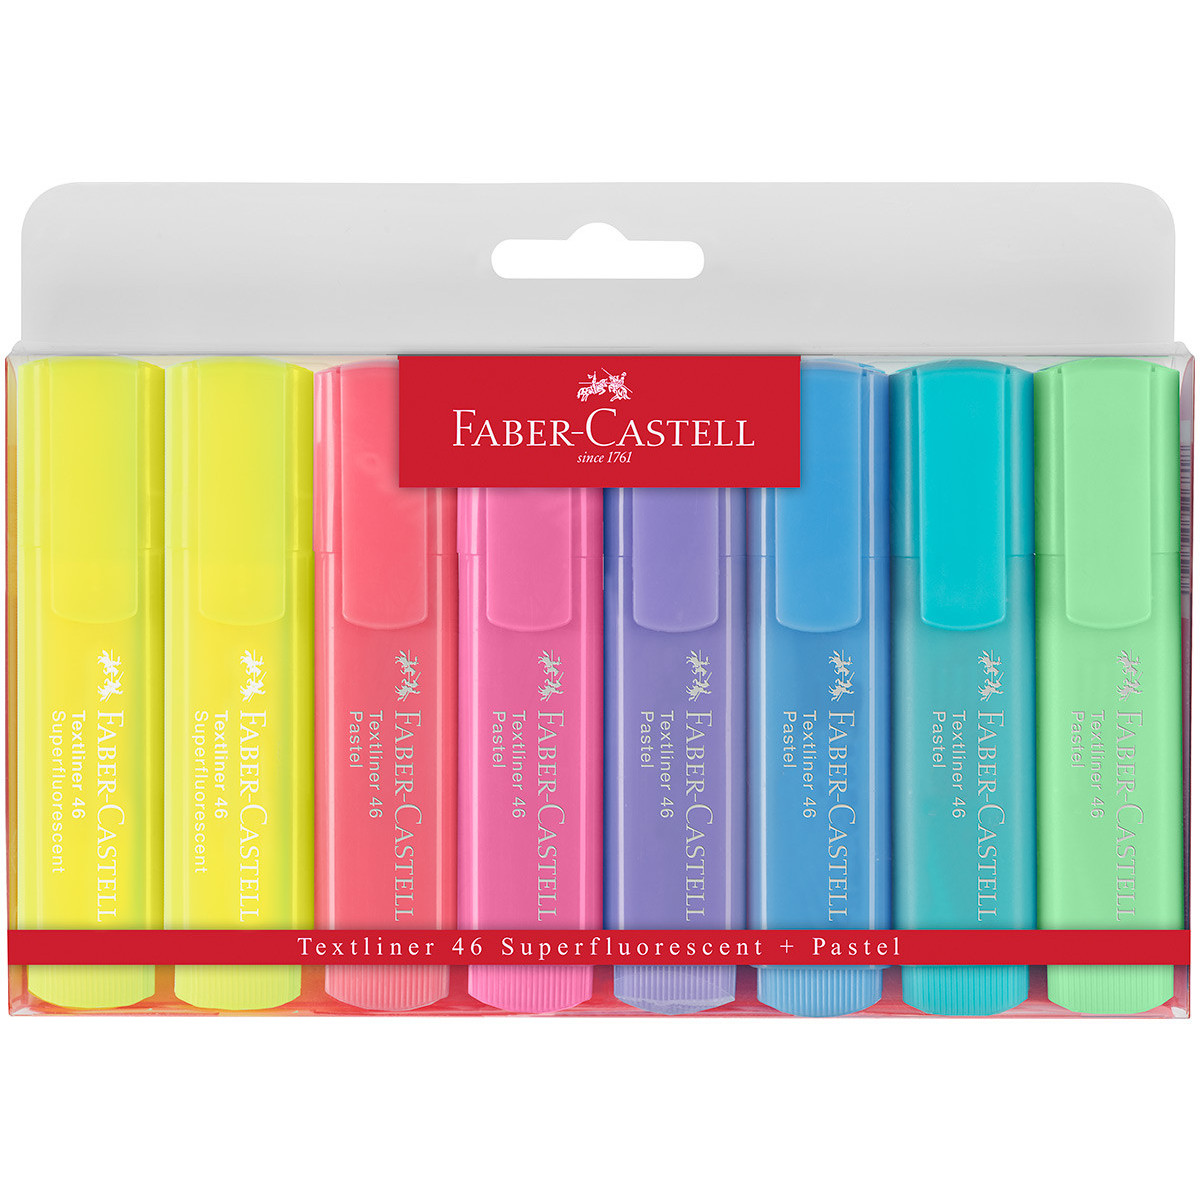 Faber-Castell Textliner 46 Pastel Highlighter - Assorted Pastel Colours (Wallet of 8)